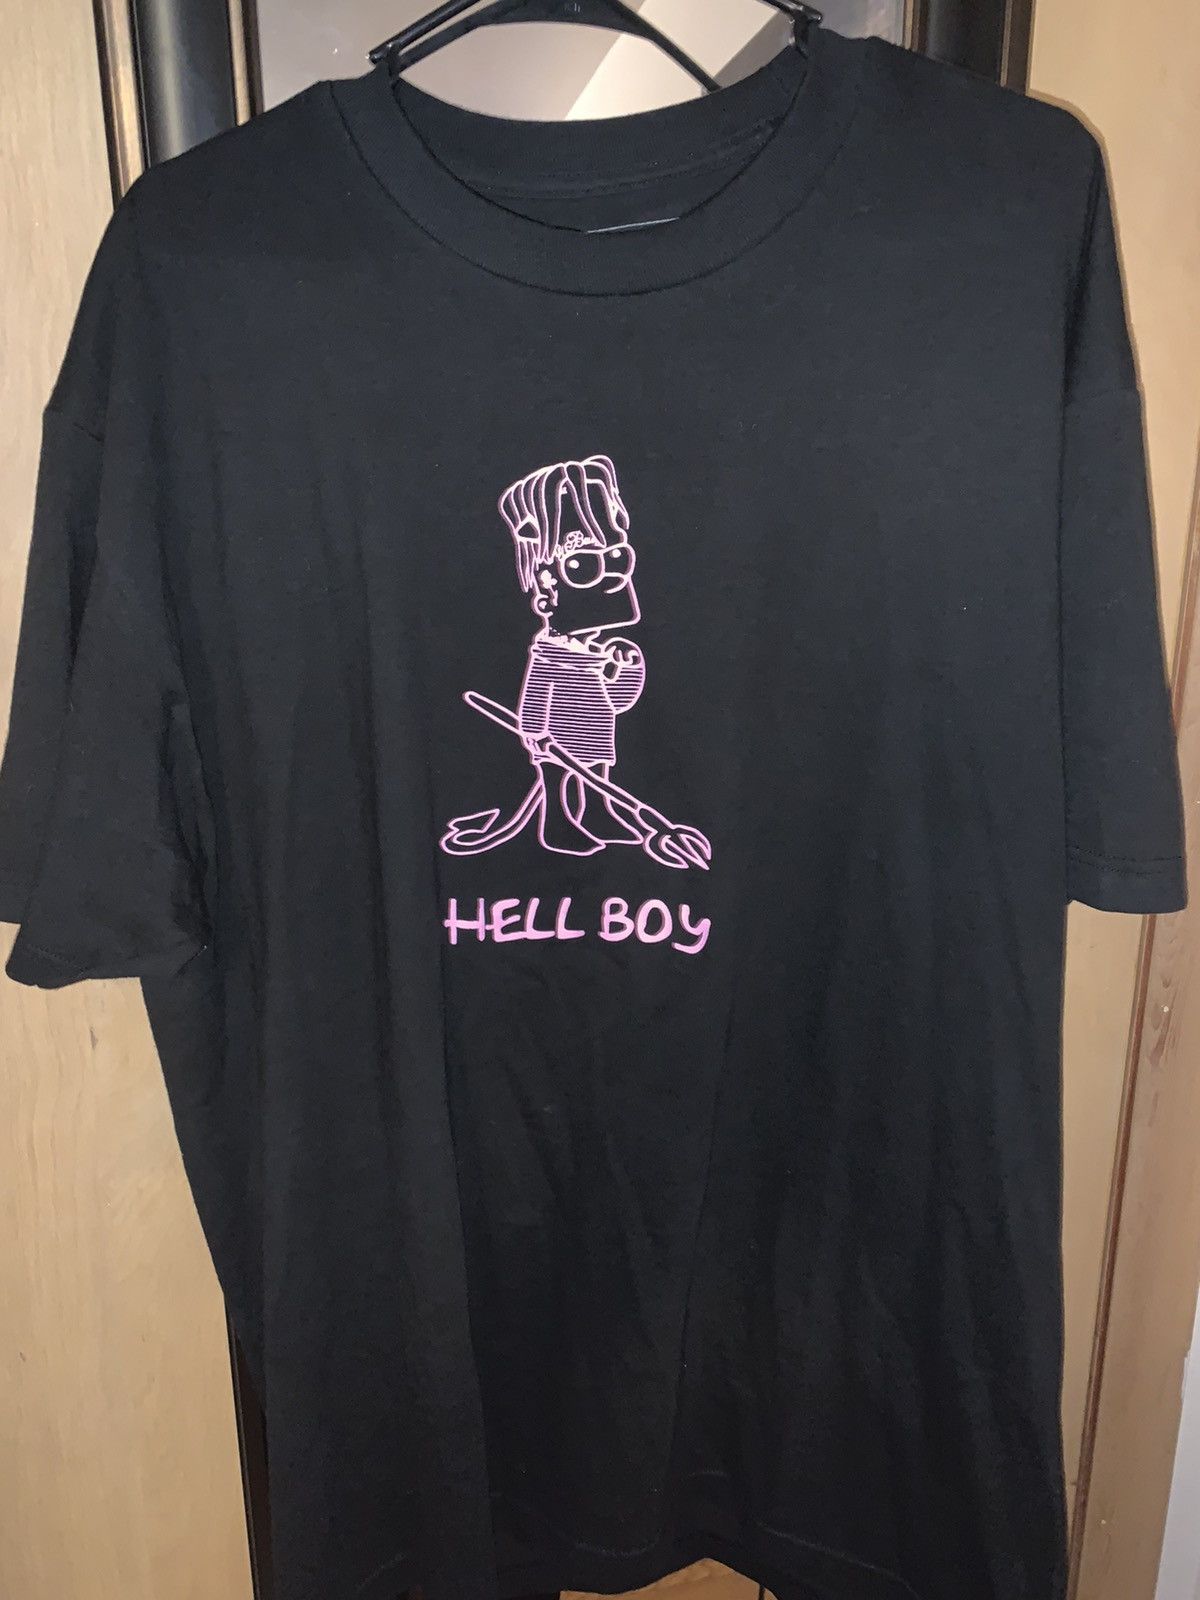 Superrradical Superrradical hellboy tee Size US XL / EU 56 / 4 - 1 Preview